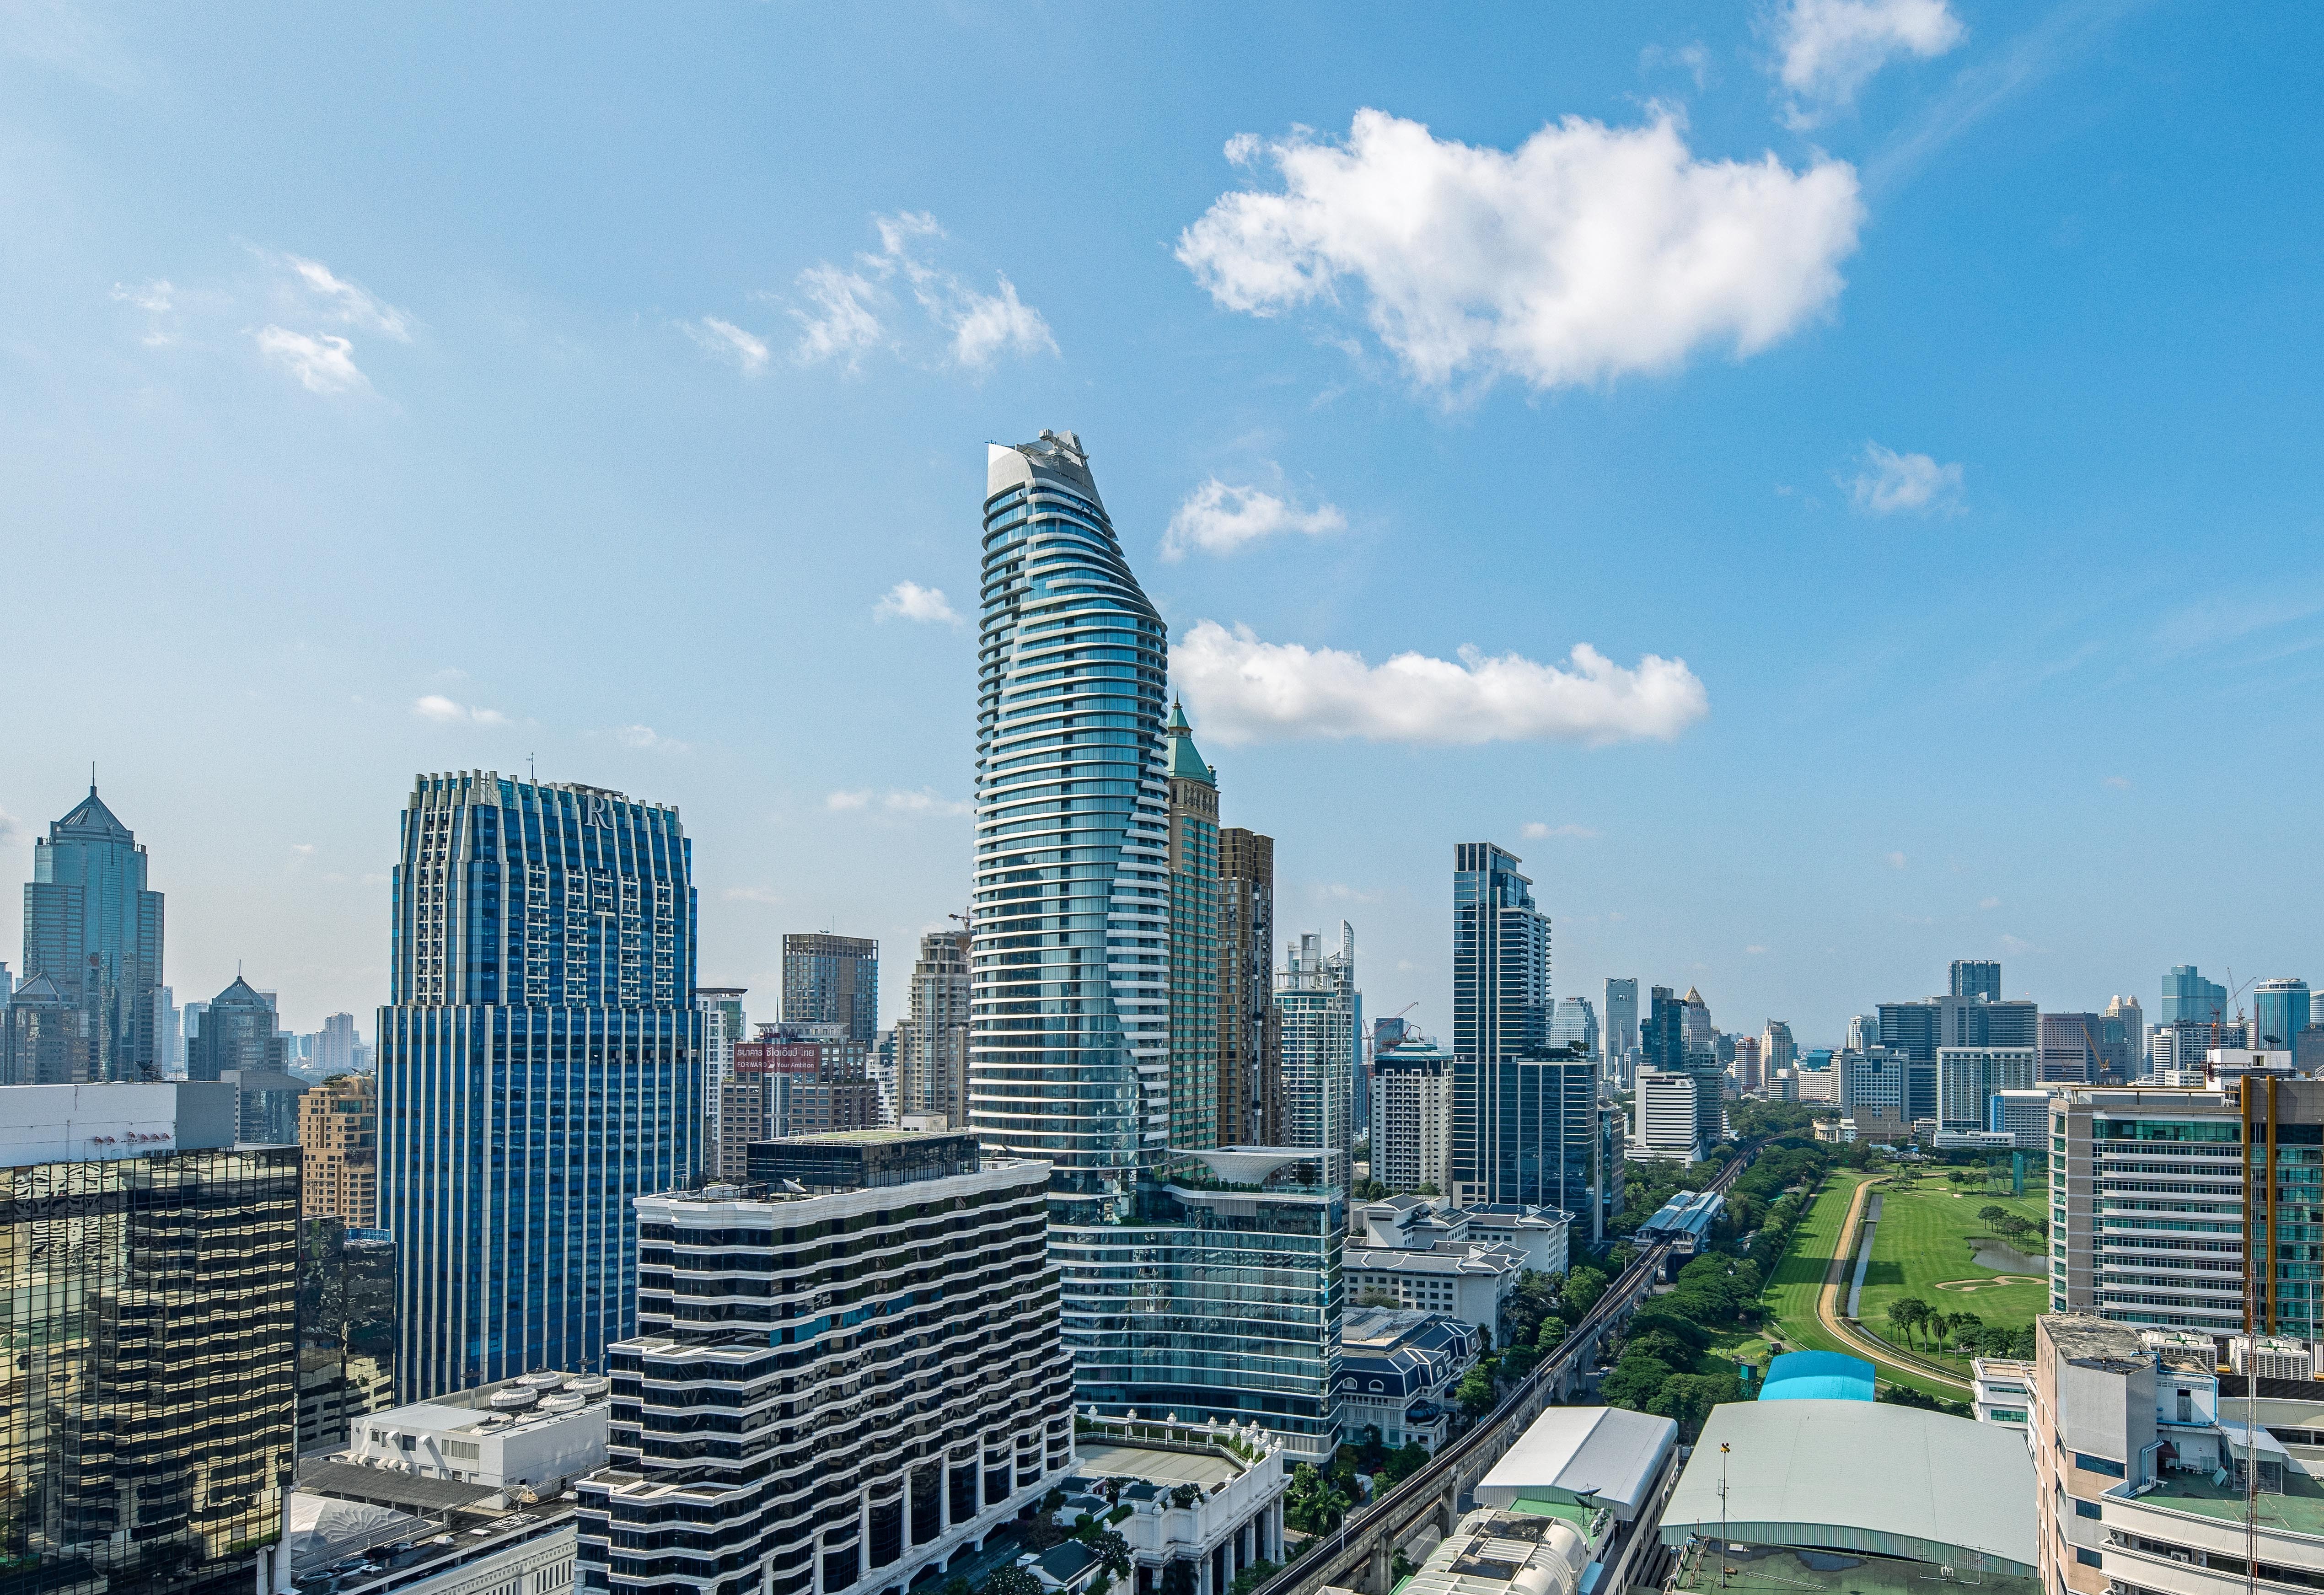 New five-star hotels, such as the Waldorf Astoria Bangkok, are dotting the city’s skyline making the Bangkok the new luxury getaway destination.